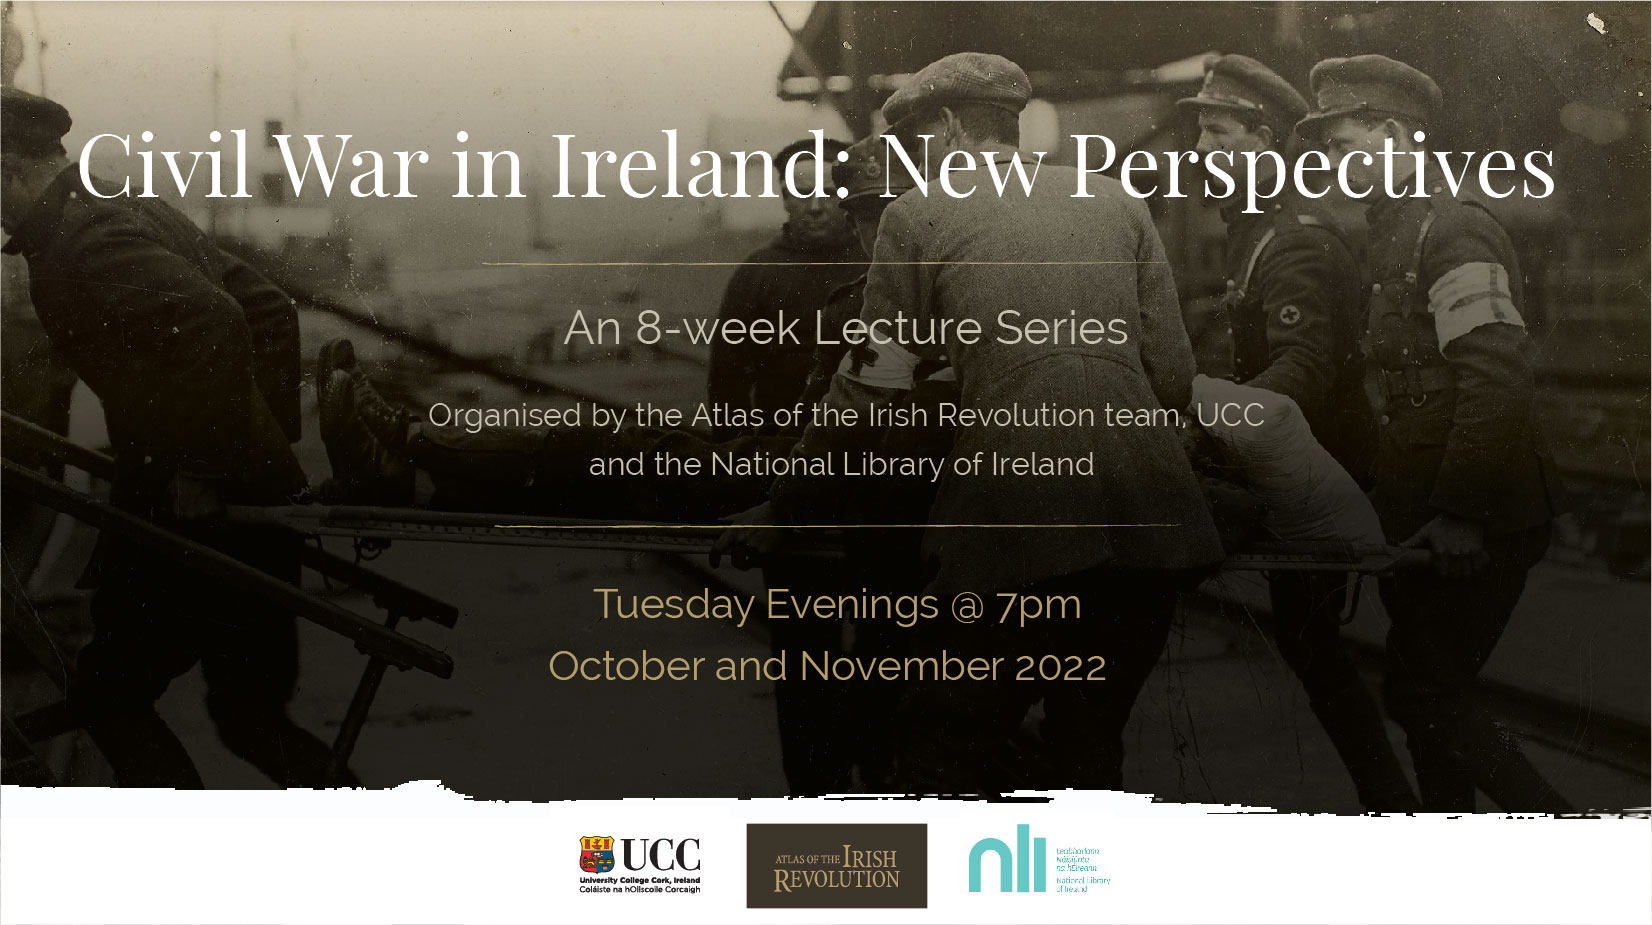 8-Week Lecture Series: 'Civil War in Ireland: New Perspectives'